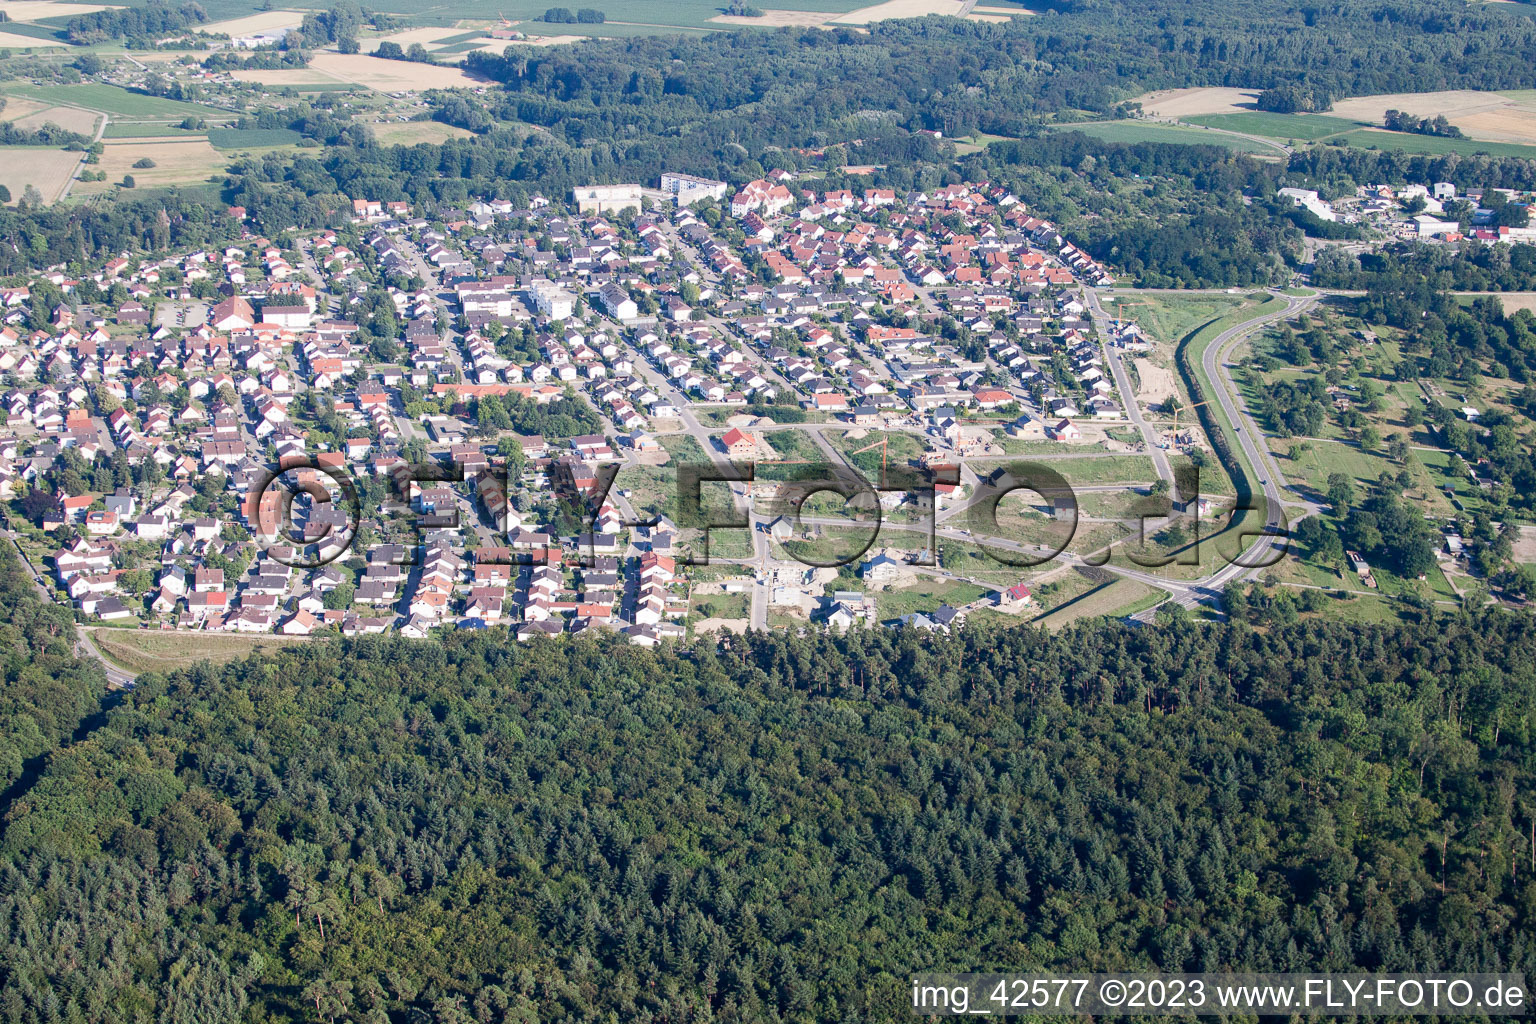 Oblique view of New development area west in Jockgrim in the state Rhineland-Palatinate, Germany